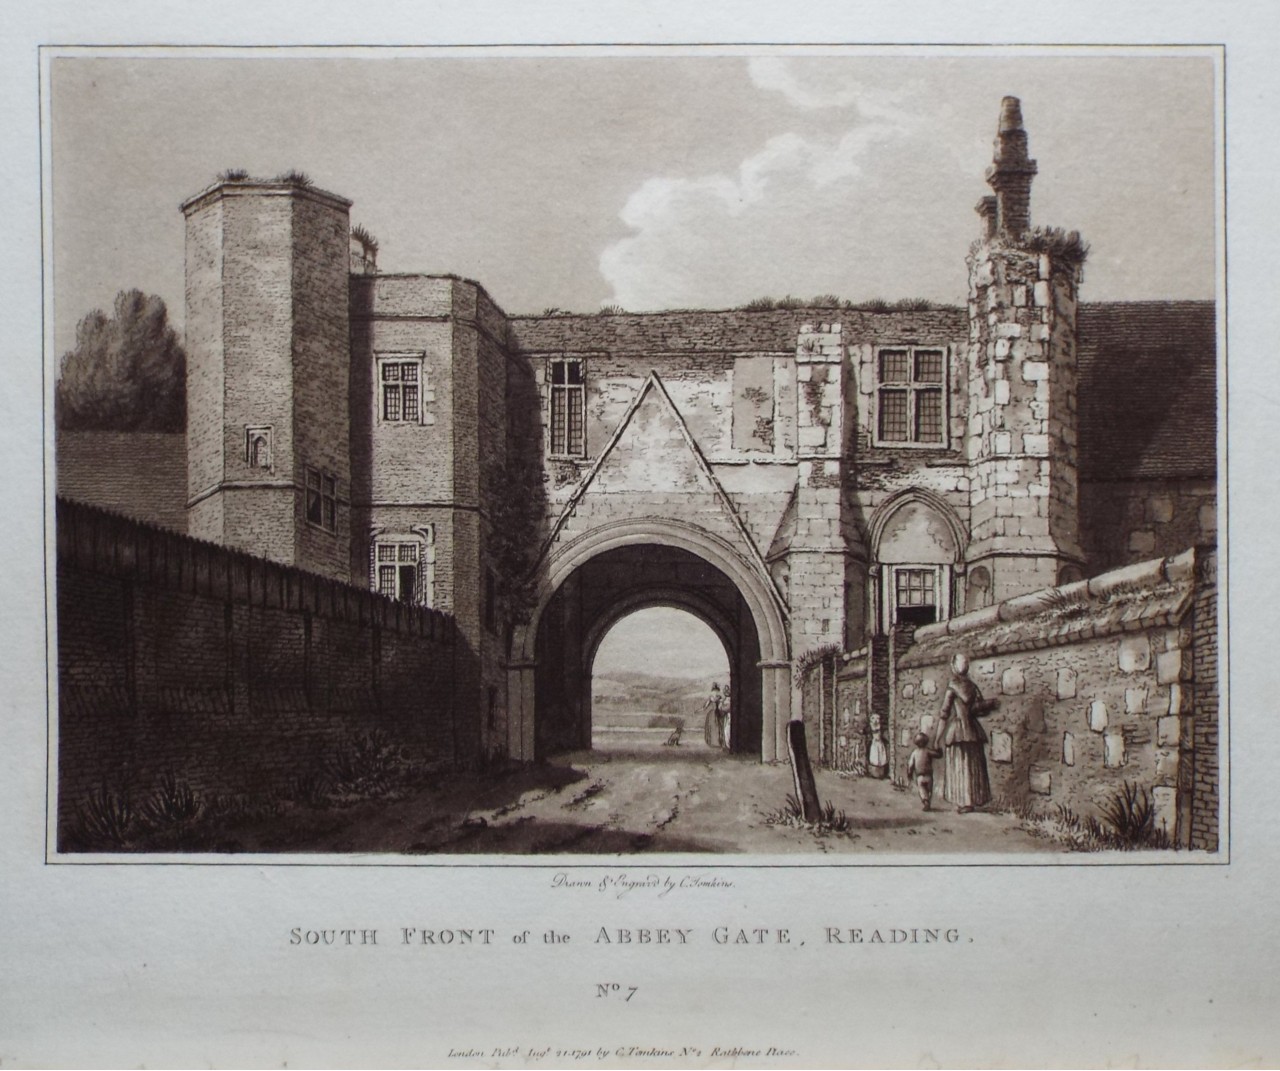 Aquatint - South Front of the Abbey Gate, Reading. - Tomkins